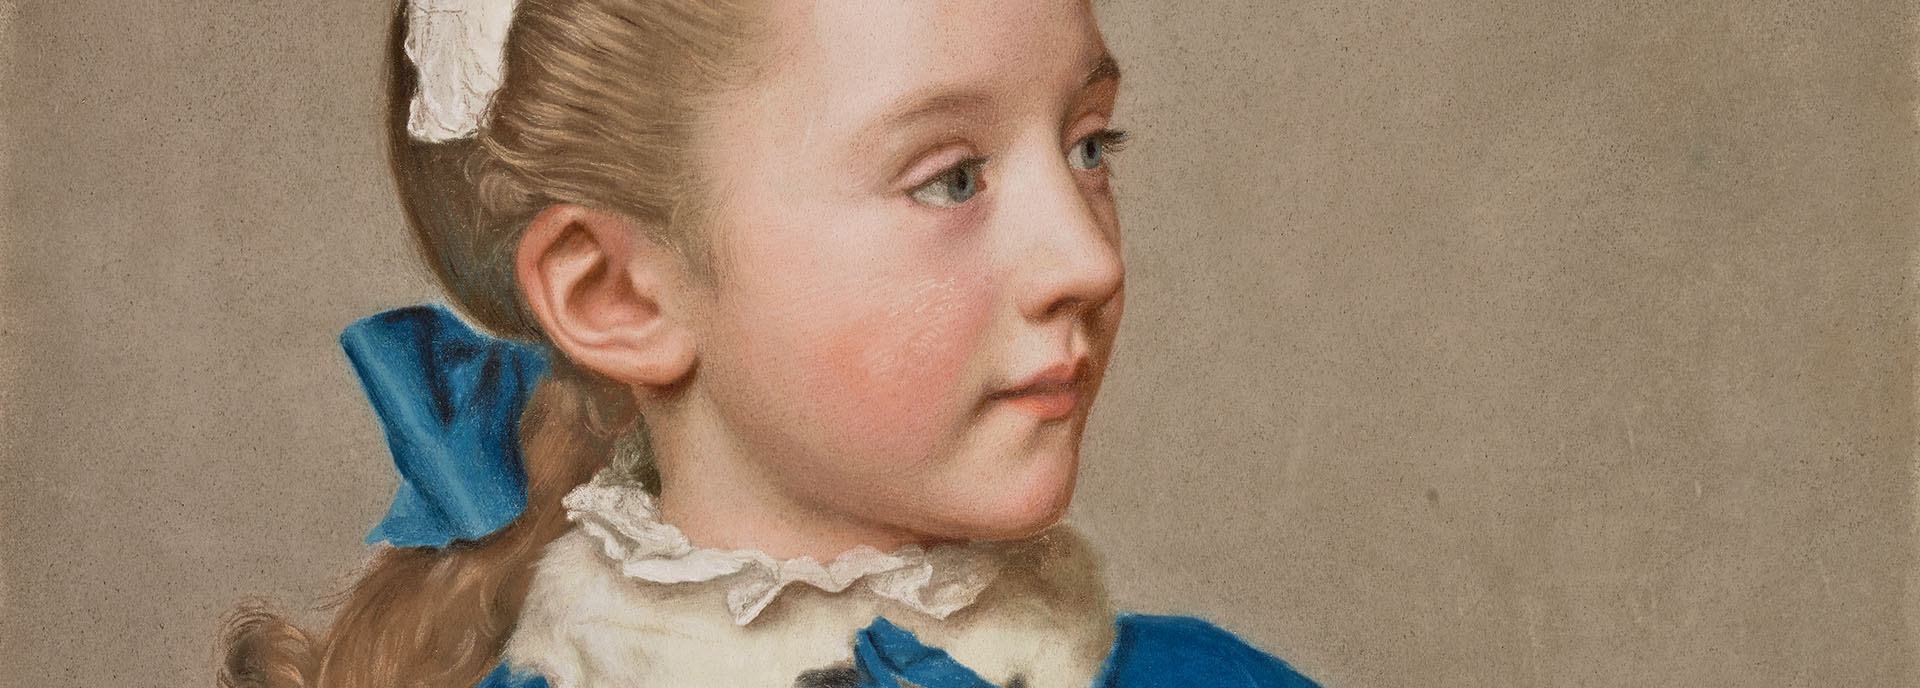 Portrait of Maria Frederike van Reede-Athlone at Seven Years of Age (detail), 1755–56, Jean-Étienne Liotard, pastel on vellum. The J. Paul Getty Museum